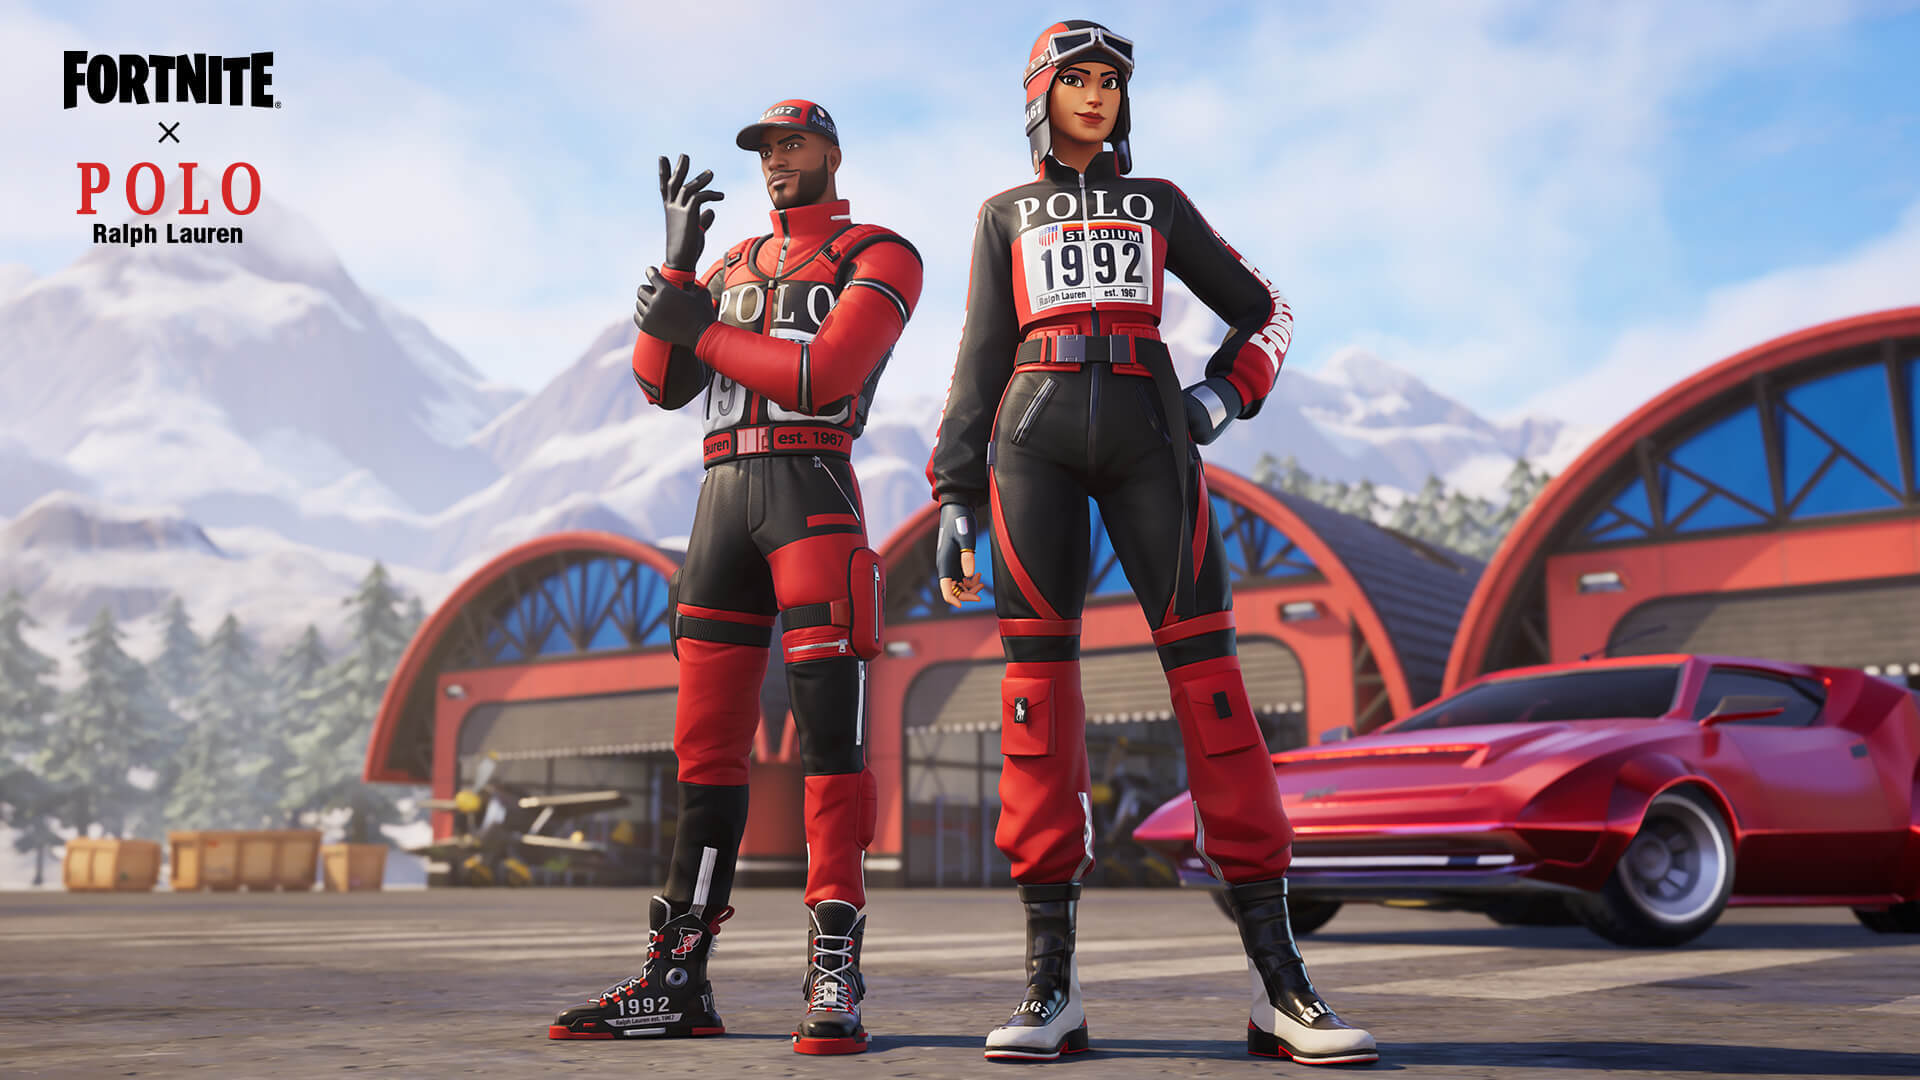 fortnite-s-polo-ralph-lauren-crossover-brings-racing-chic-to-battle-royale